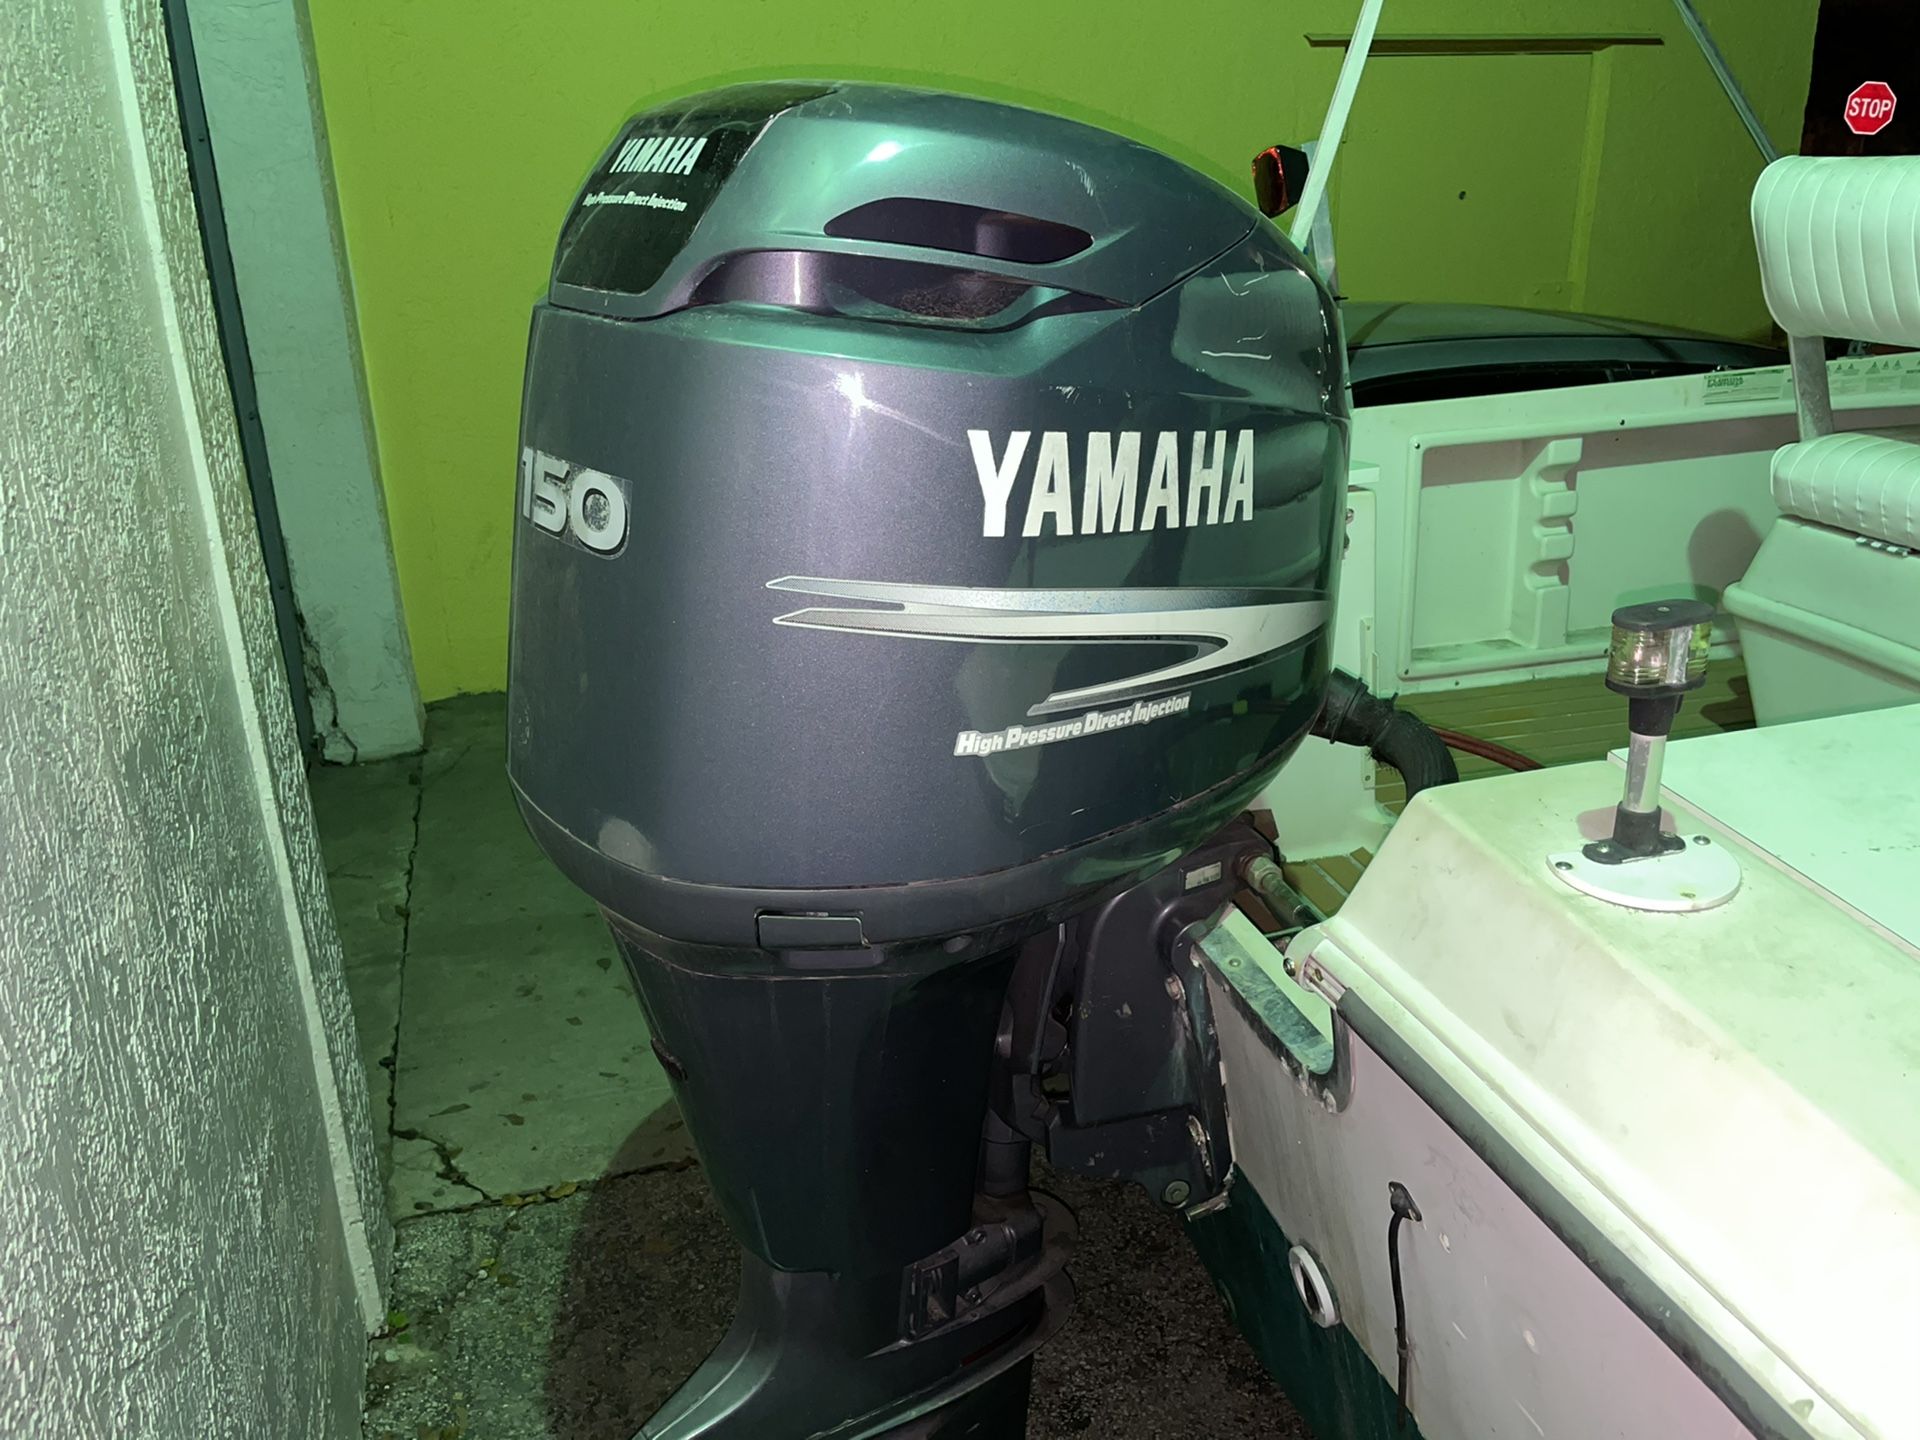 Wellcraft Fish 18 with 2005 Yamaha 150 Outboard, plus trailer